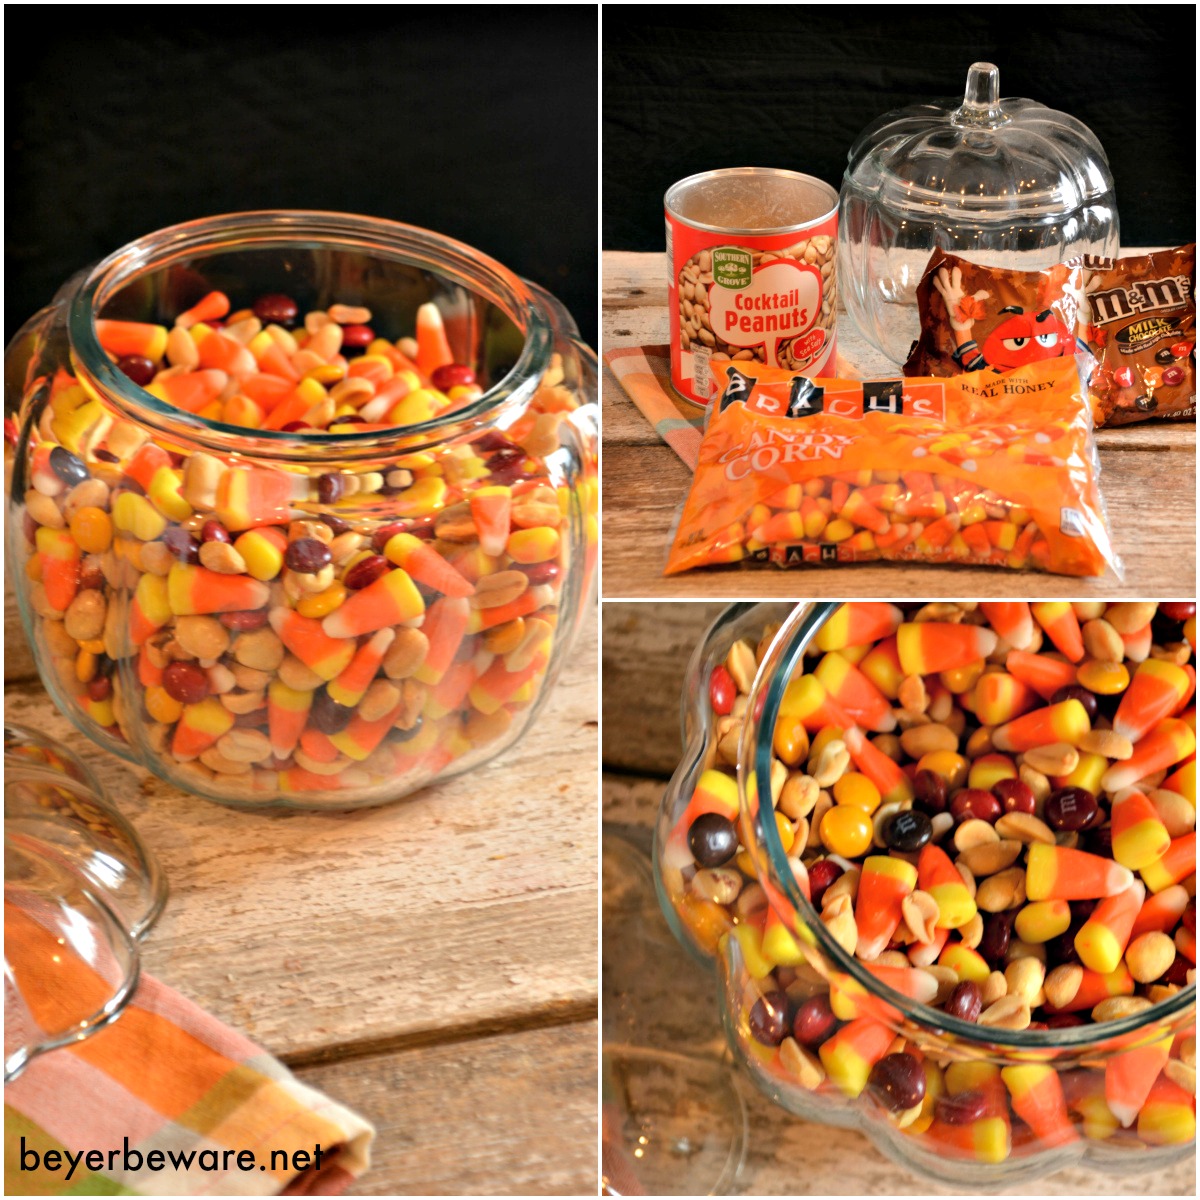 Candy corn trail mix has a combination of flavors that is just like a chocolate payday bar. One of our favorite treats of fall.